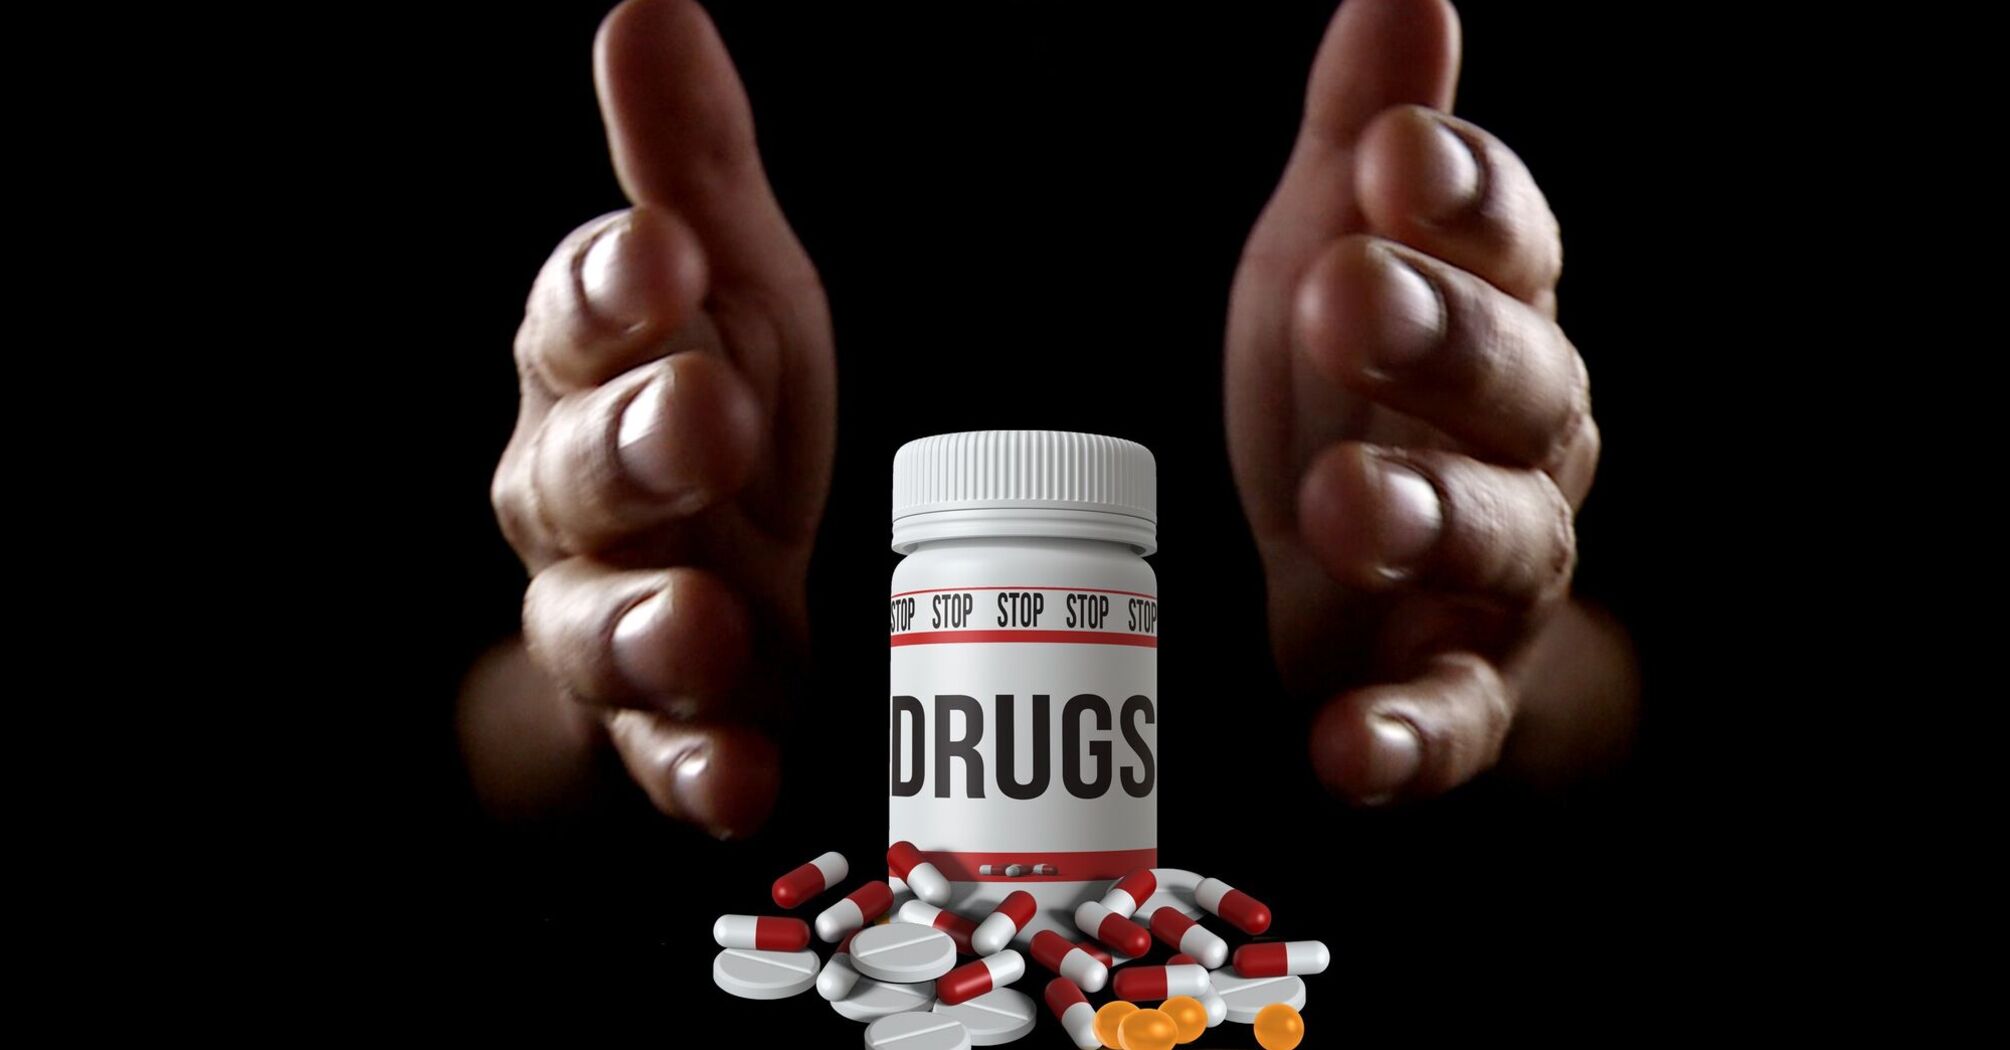 A pill bottle labeled 'STOP DRUGS' with scattered pills and hands signifying rejection